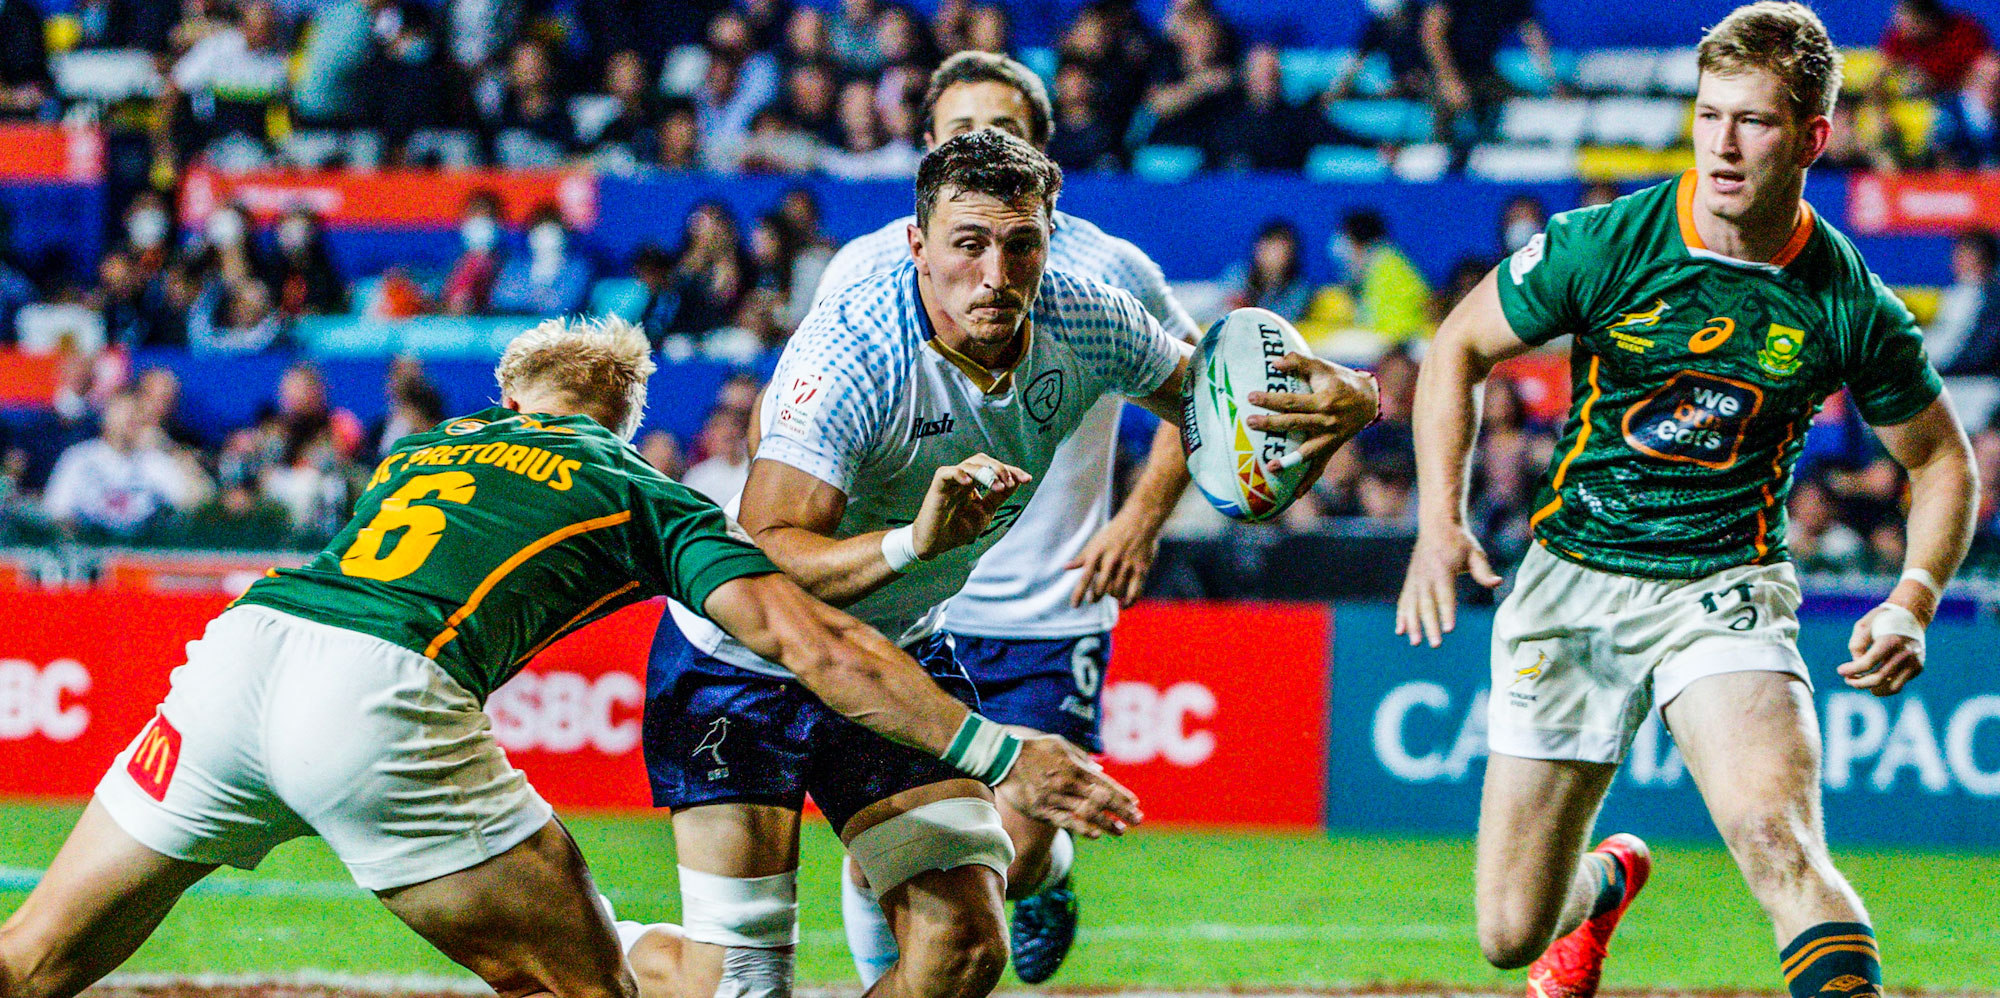 Uruguay tested the Blitzboks' defence early in the match.